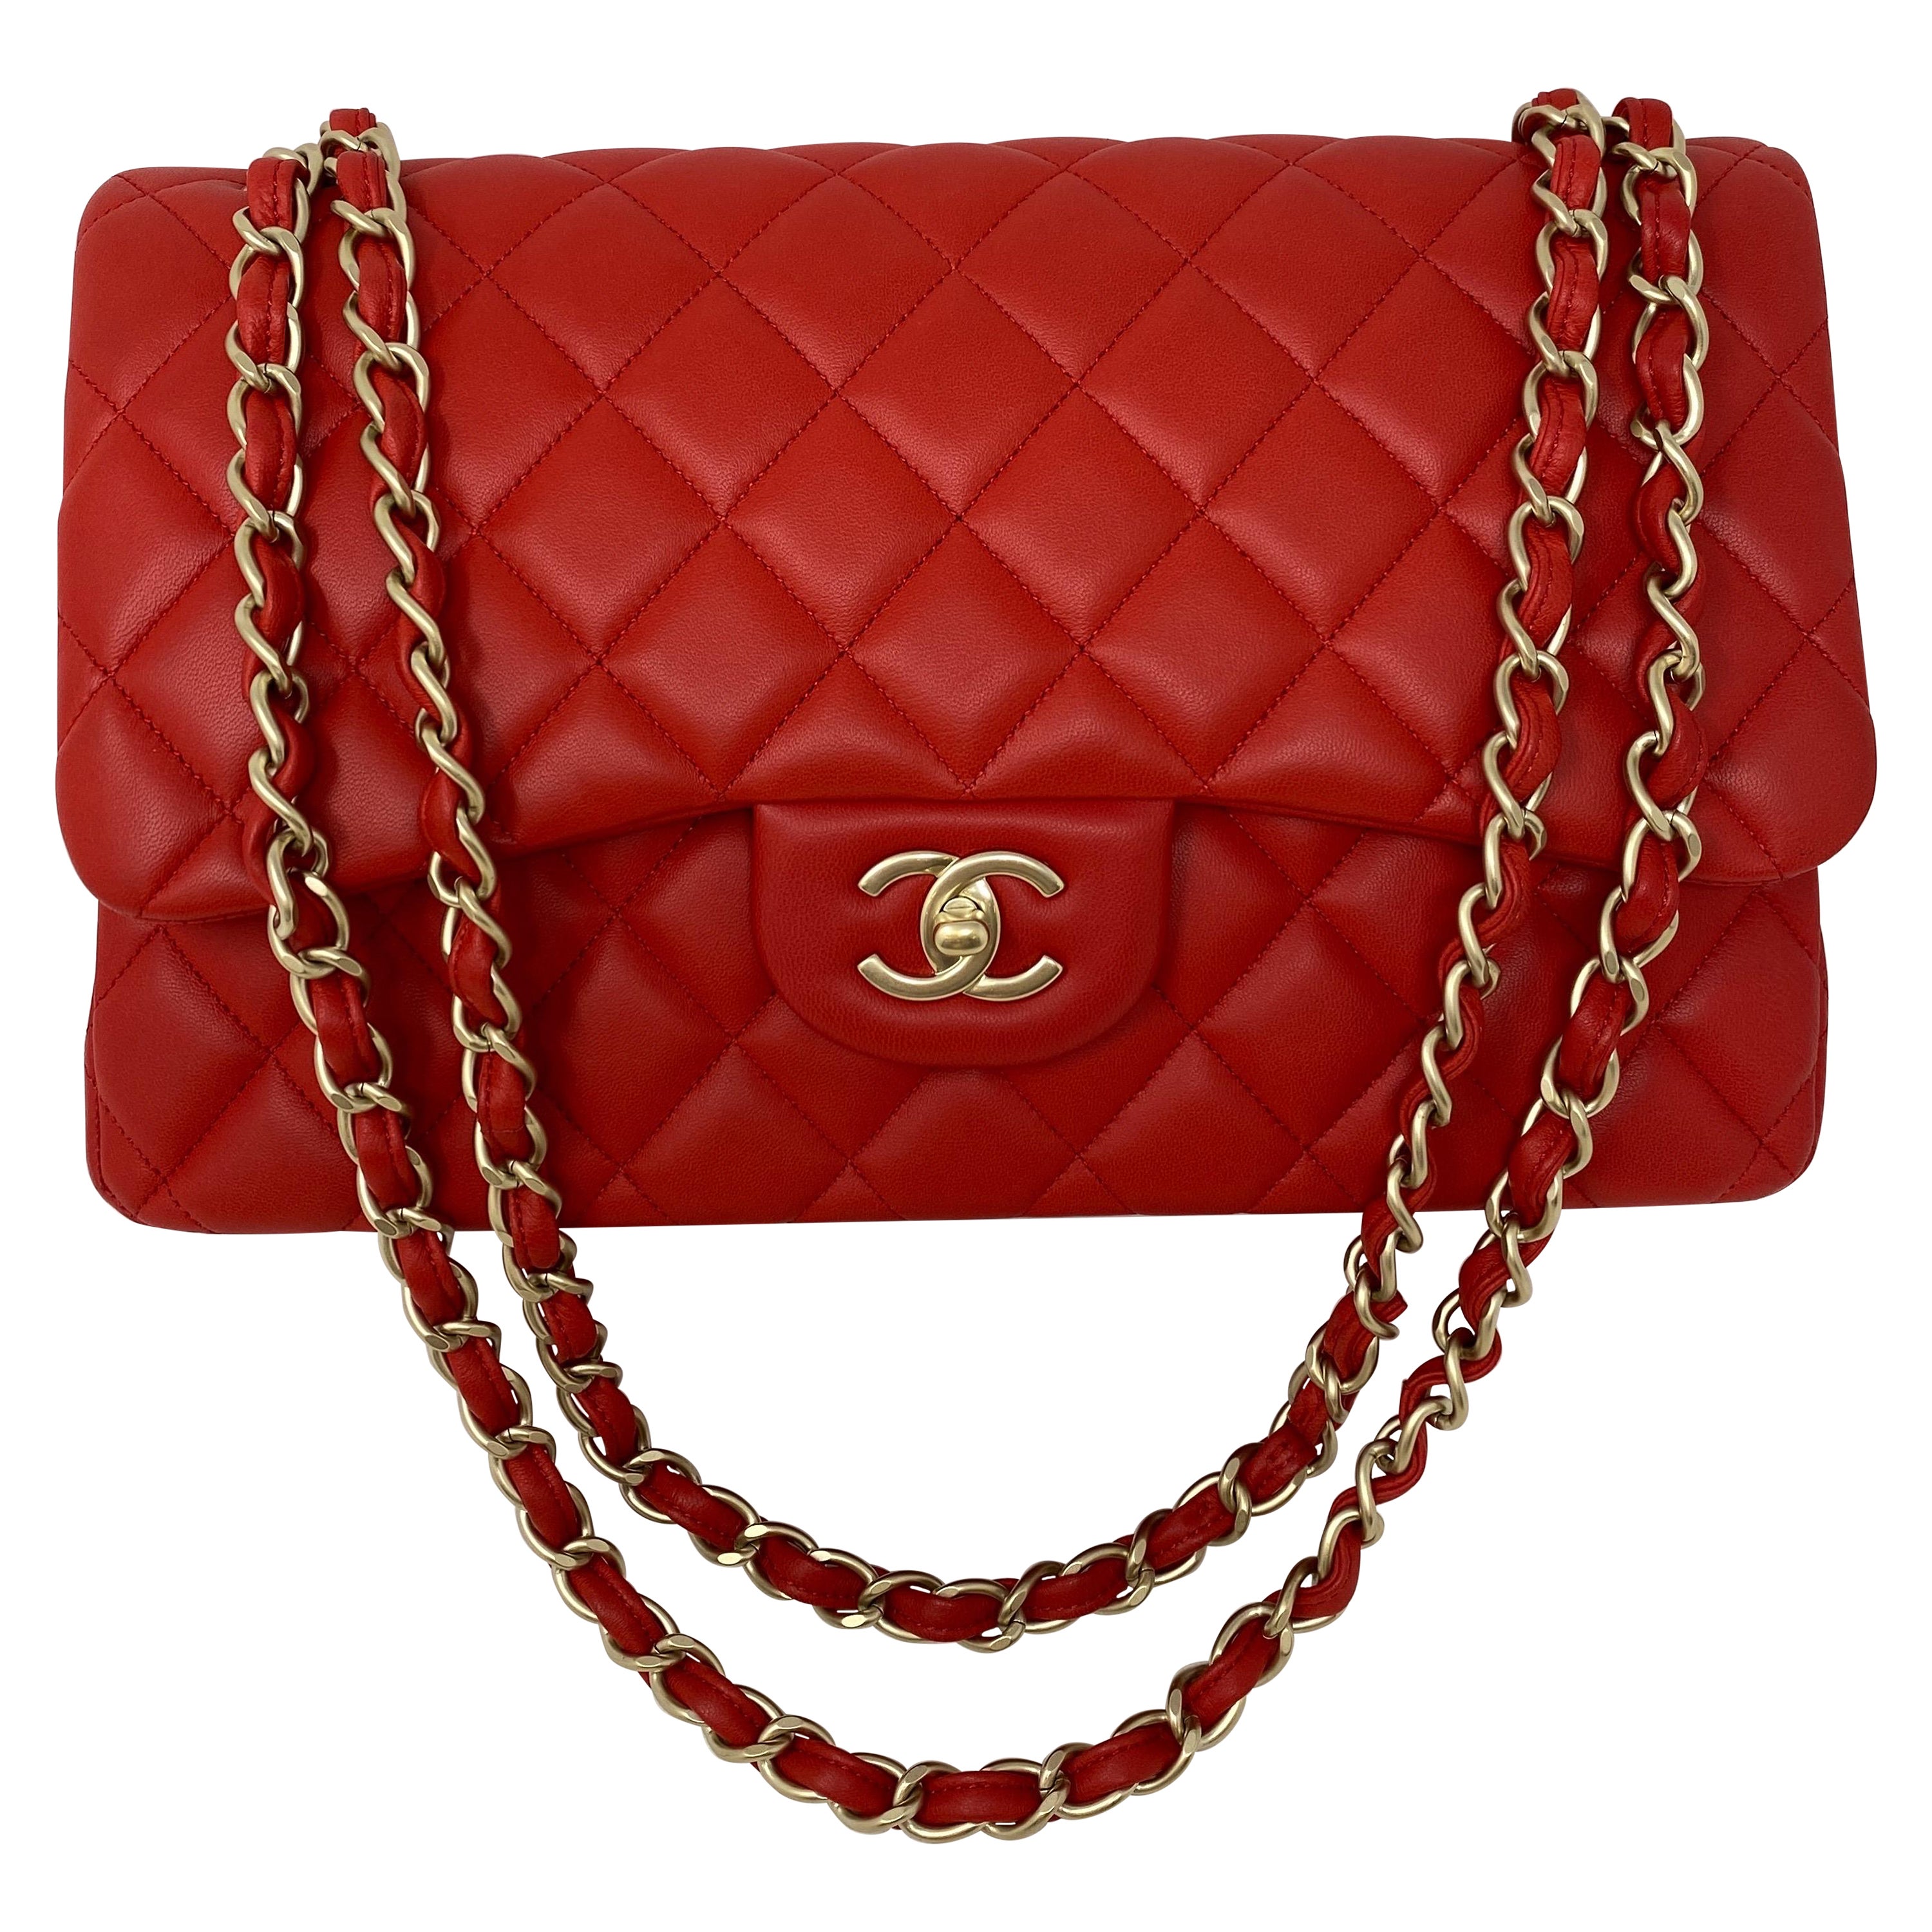 1990 Chanel Red Quilted Lambskin Vintage Small Classic Single Flap Bag